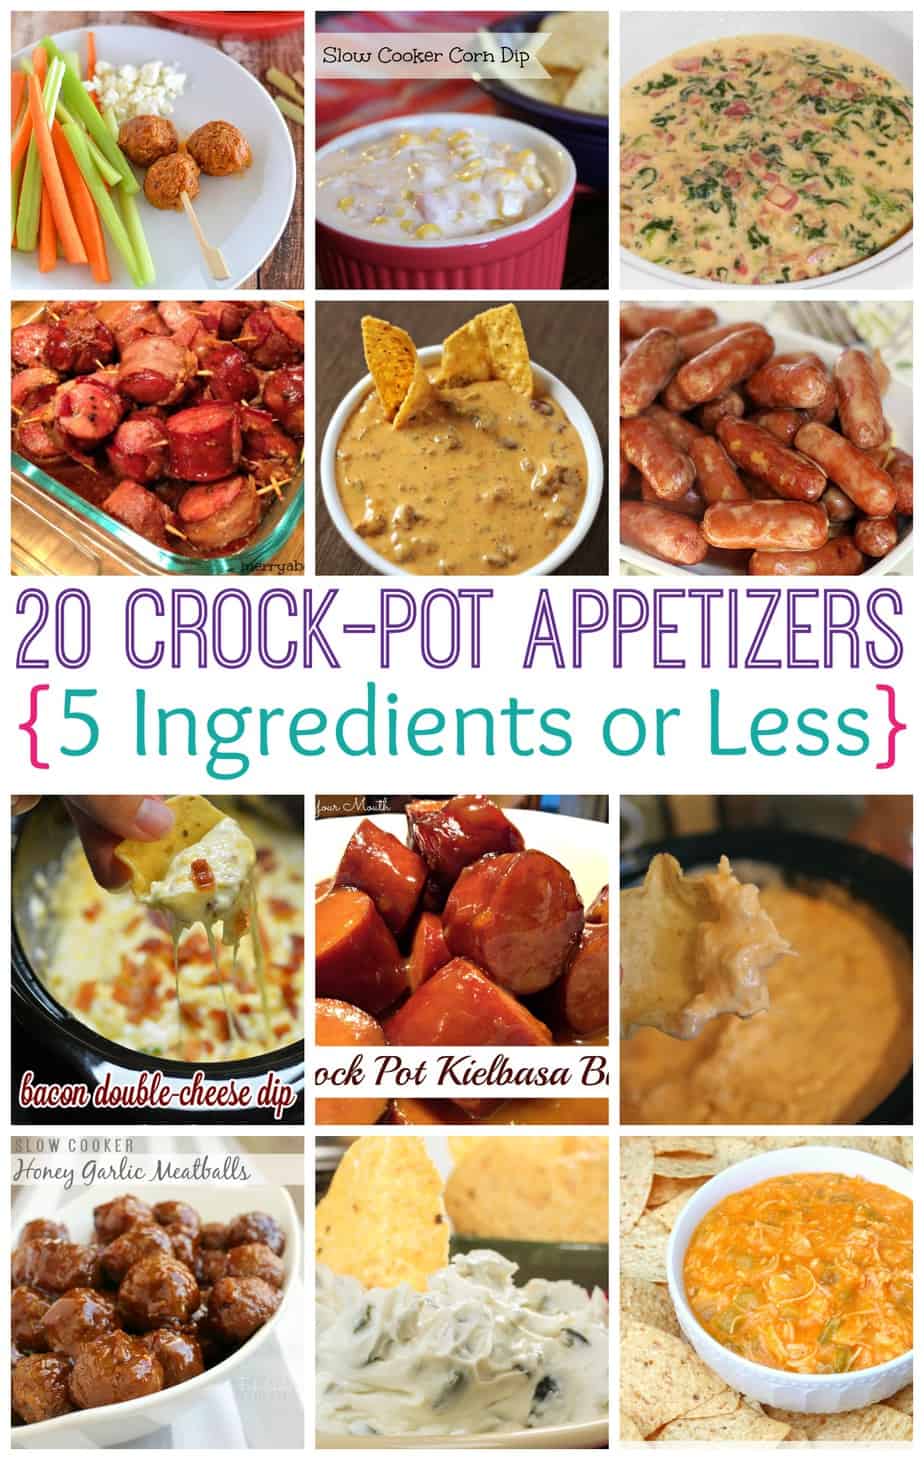 20 Crock-Pot Appetizers {5 Ingredients or less}